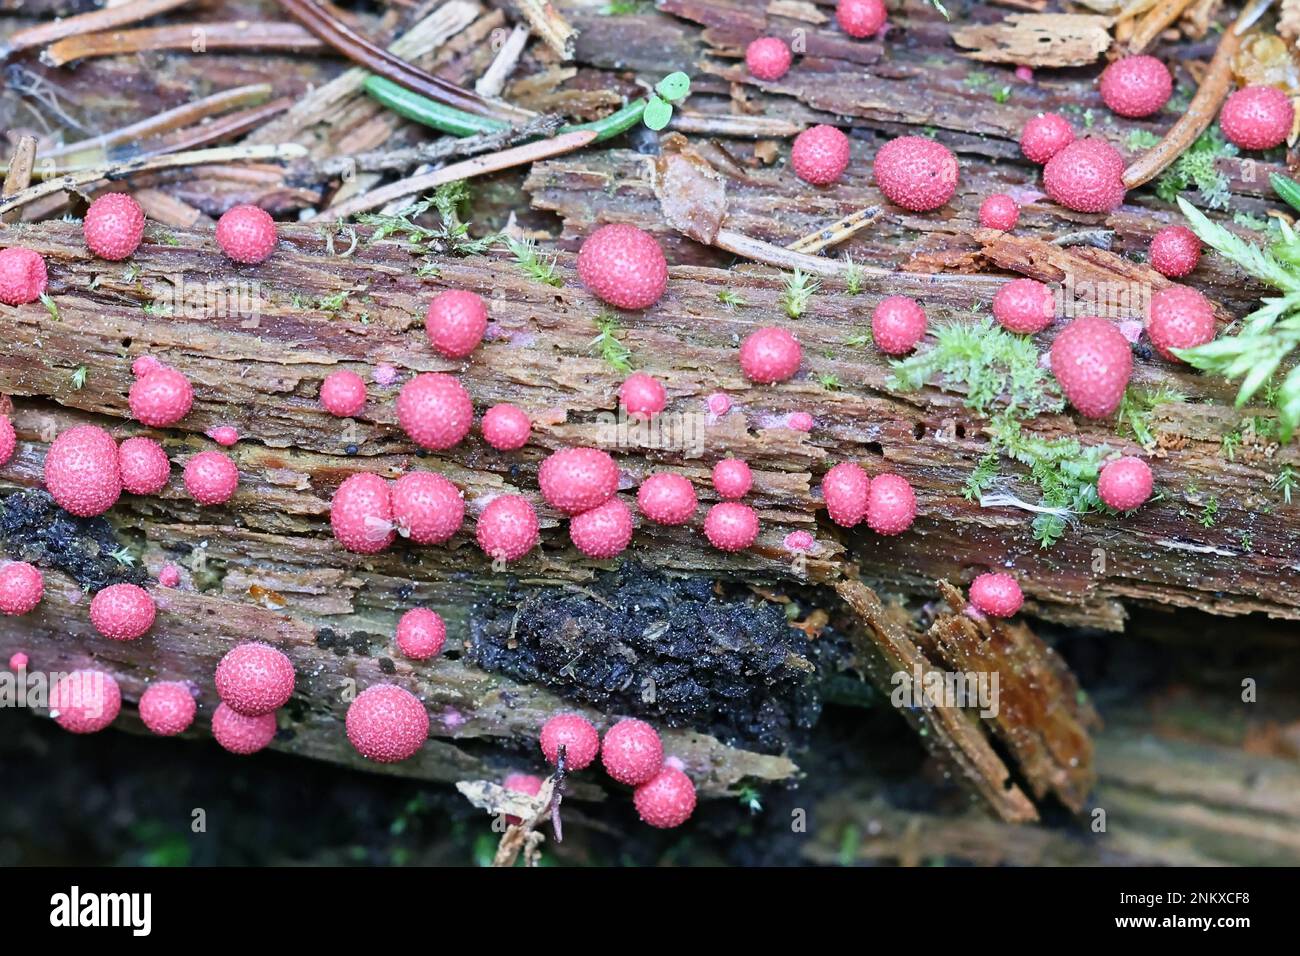 Lycogala epidendrum, commonly known as wolf's milk, slime mold from Finland Stock Photo